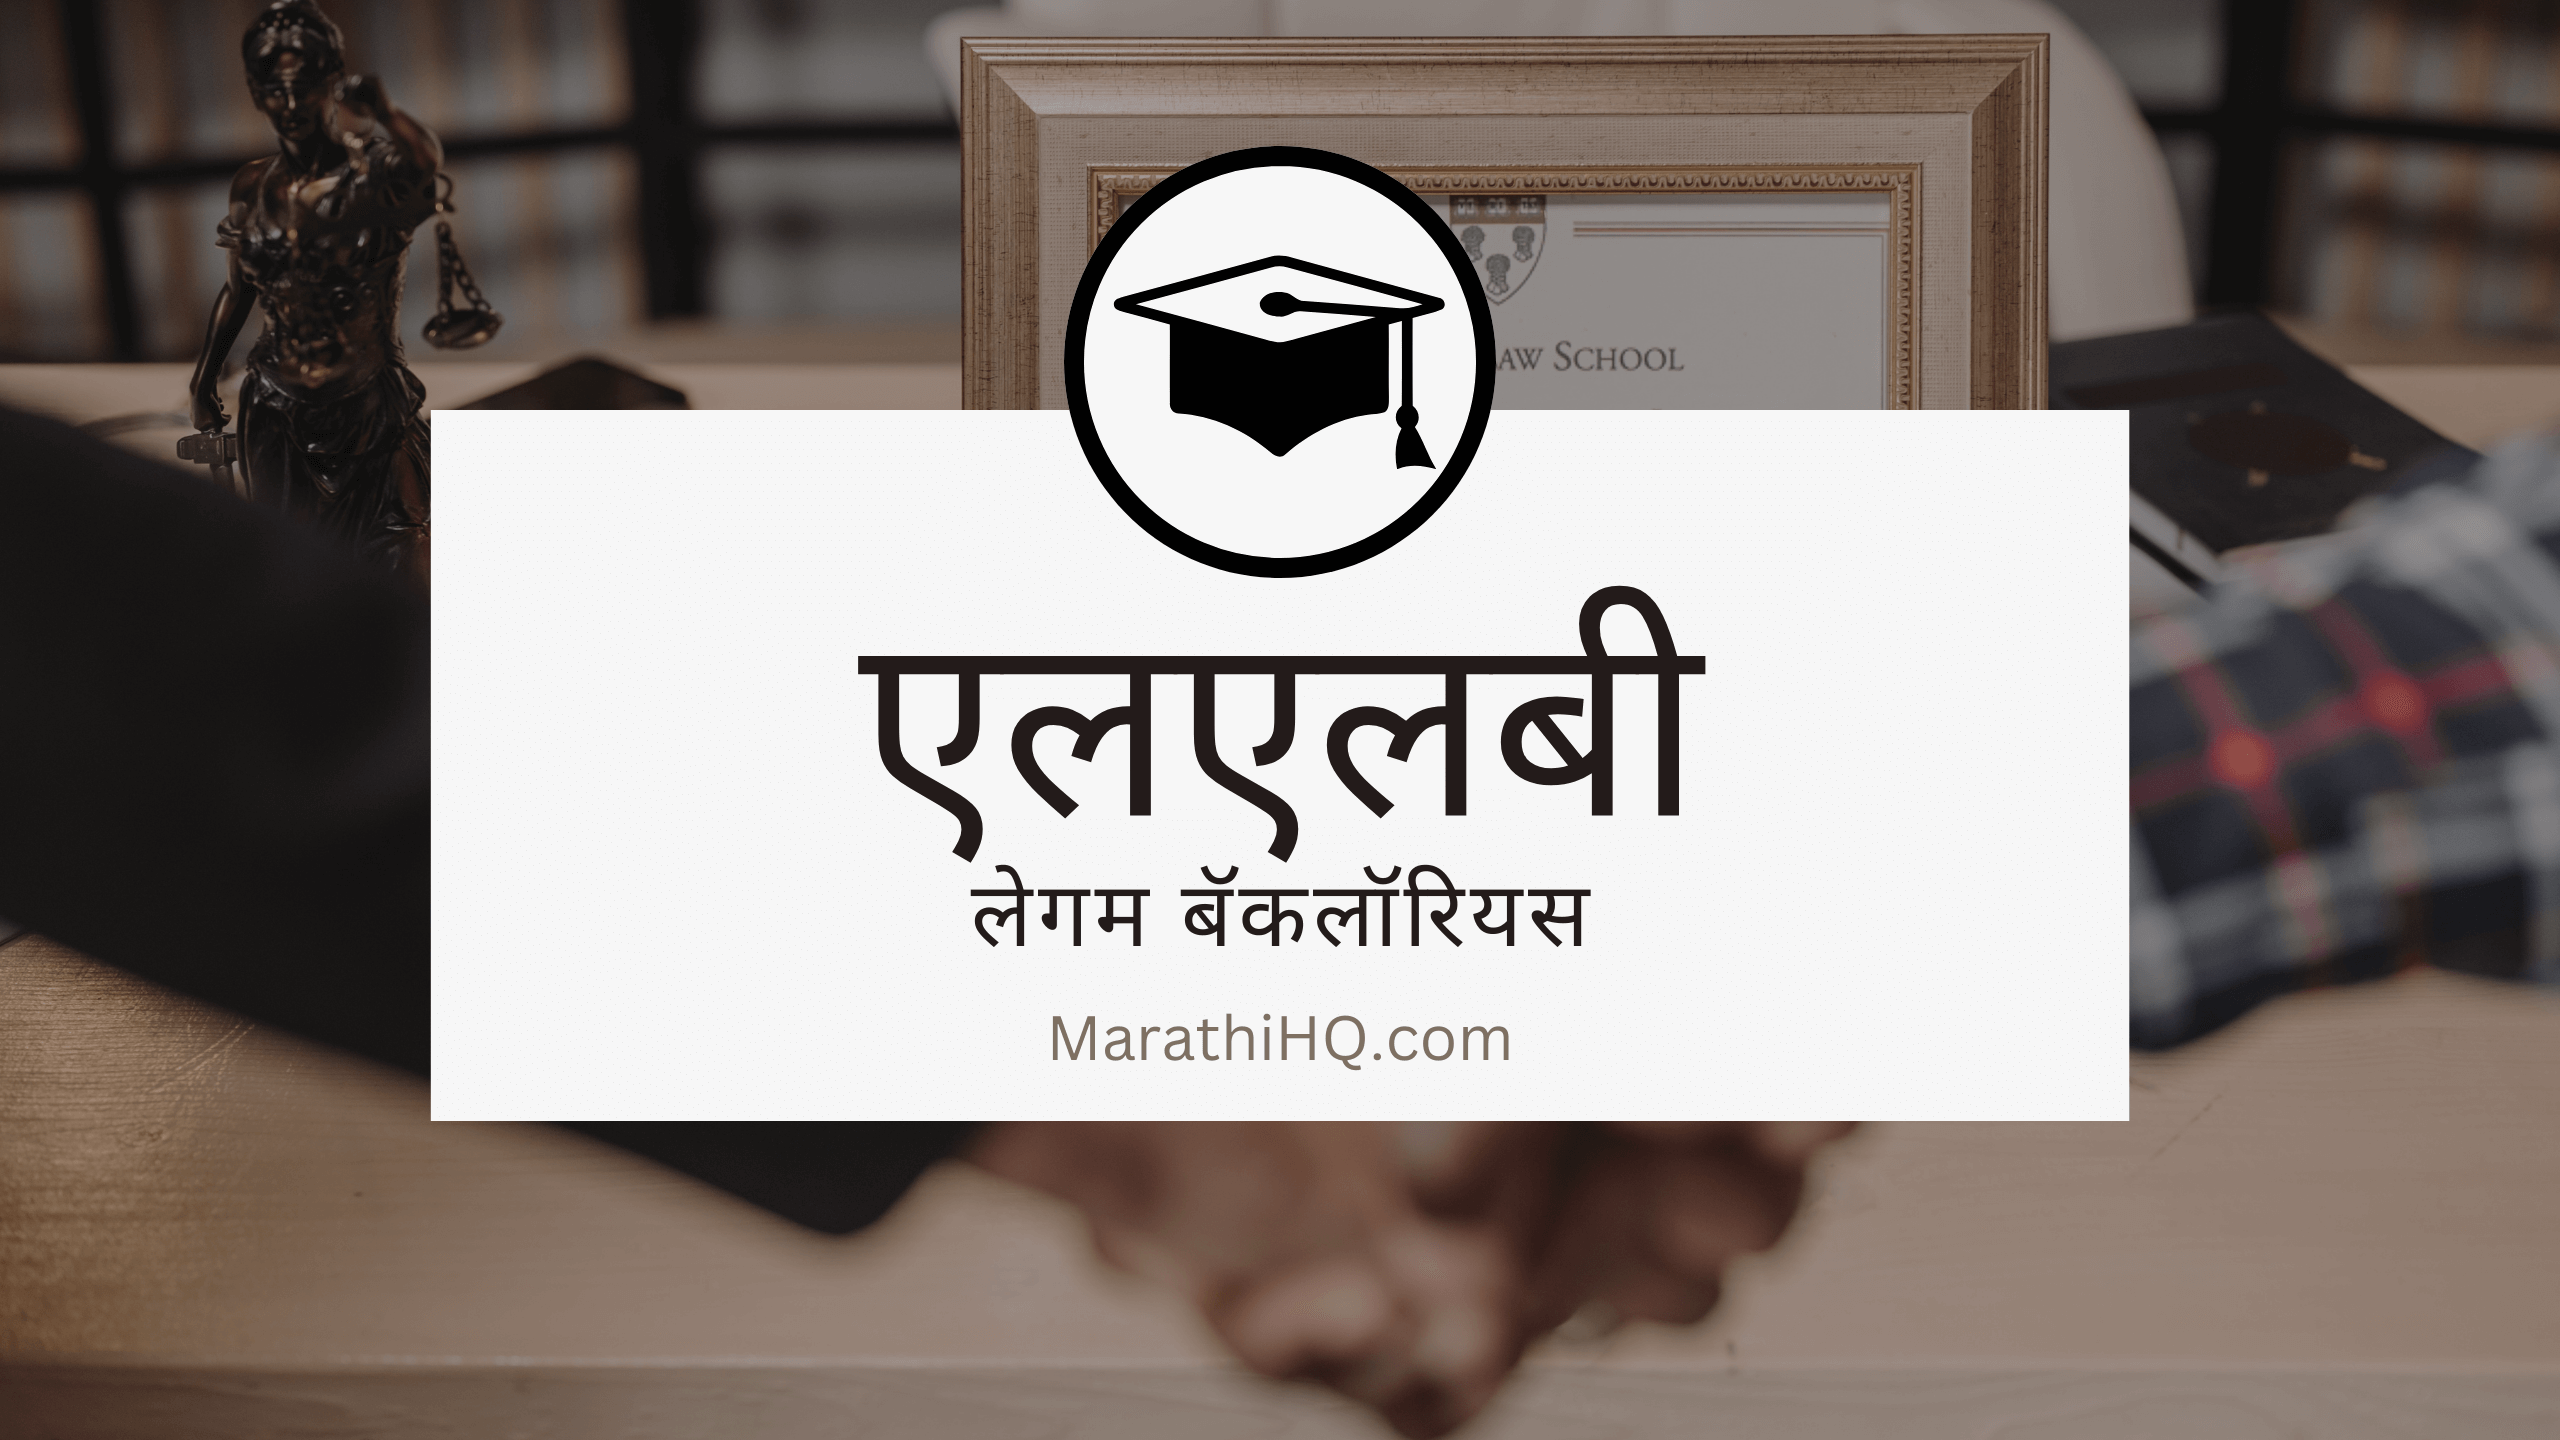 कसं बनायचं वकील 👩‍💼⚖️ || LLB म्हणजे काय ? 🤔|| How to Become Lawyer || What is LLB ?